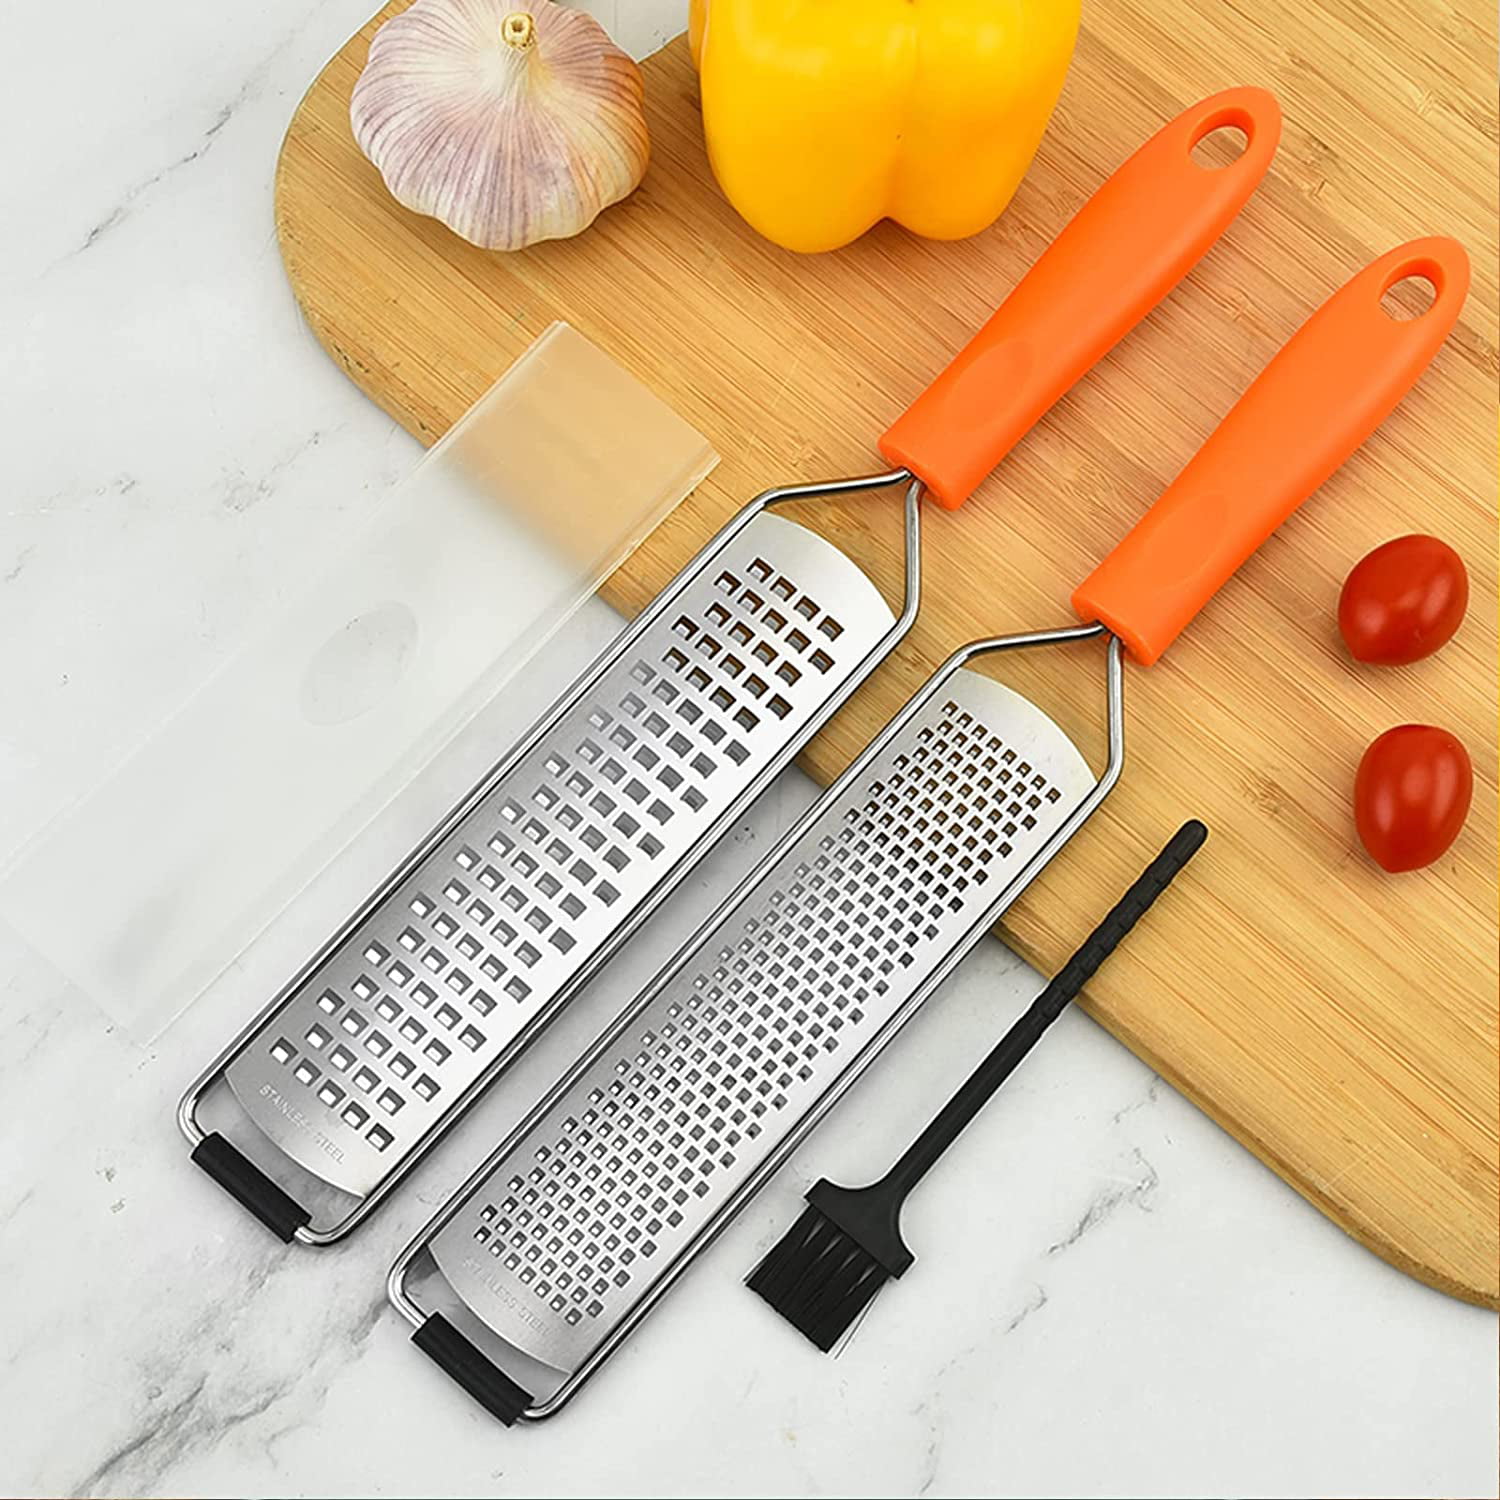 12.5 inch Lemon Zester & Cheese Grater & Vegetable Grater - Parmesan Cheese  Lemon, Garlic, Chocolate, Fruits, Vegetables, Ginger Grater - Cheese